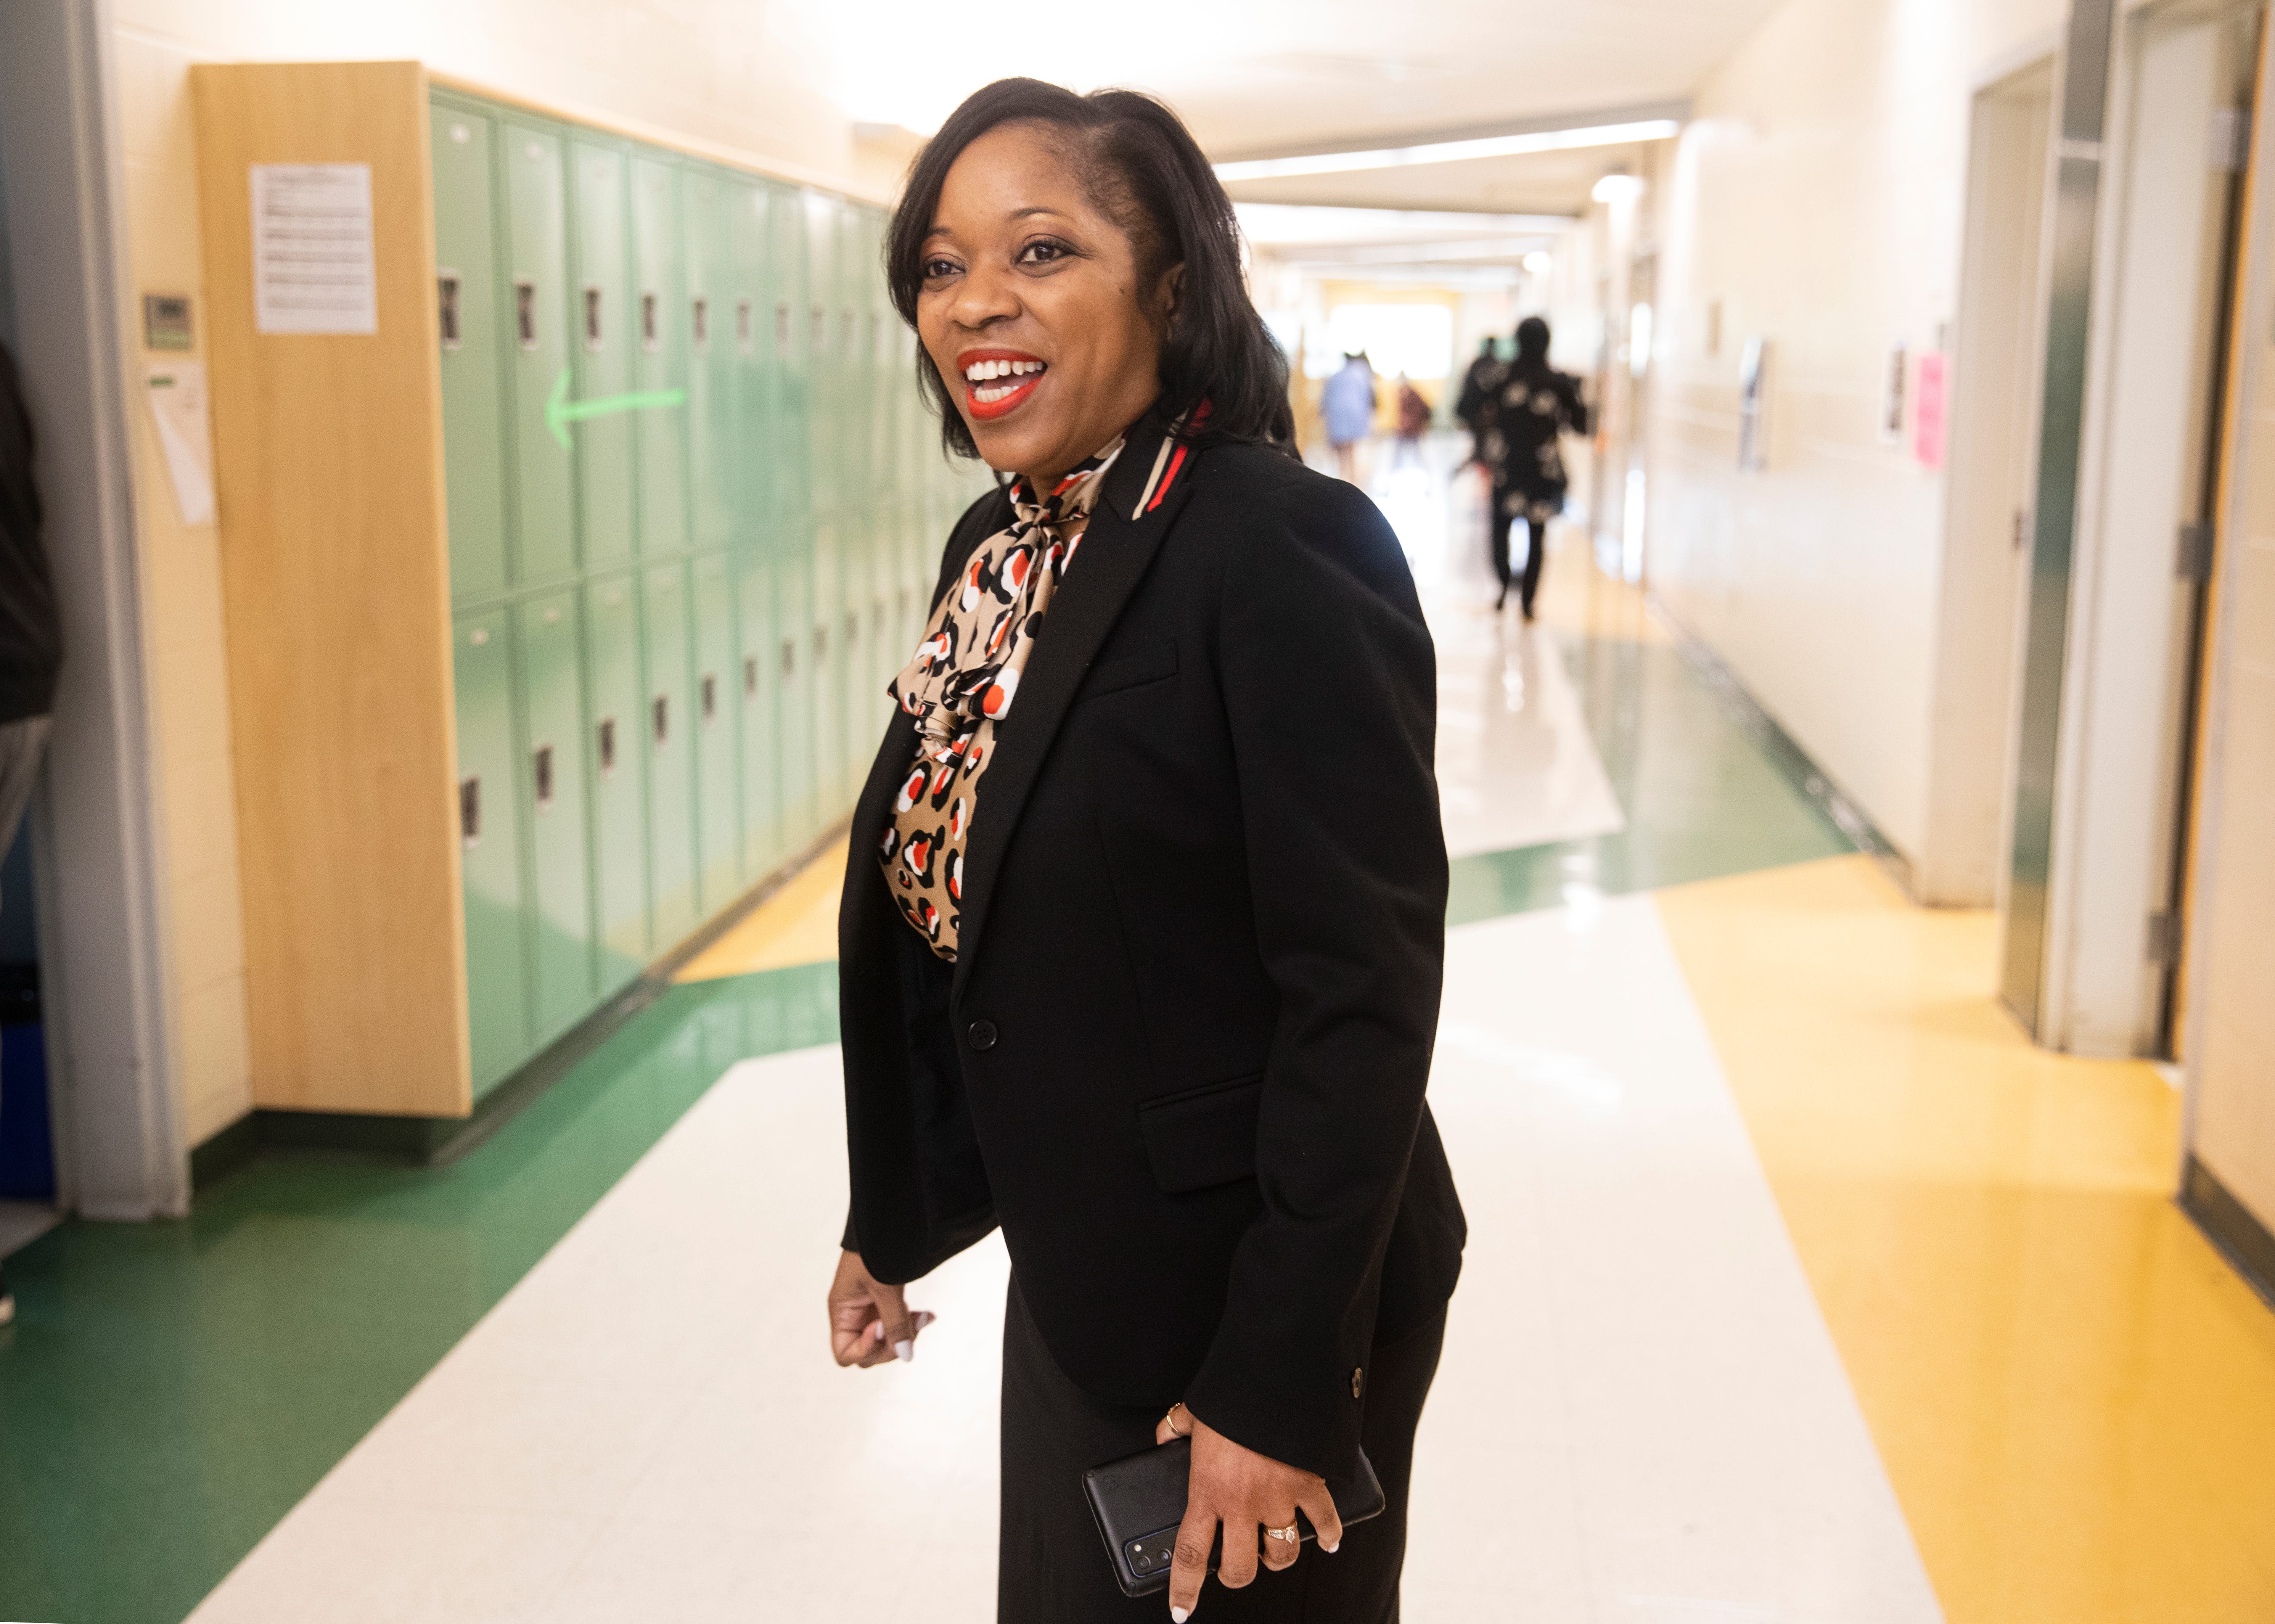 Wright debacle rests squarely in the hands of Cincinnati Public Schools board | Opinion